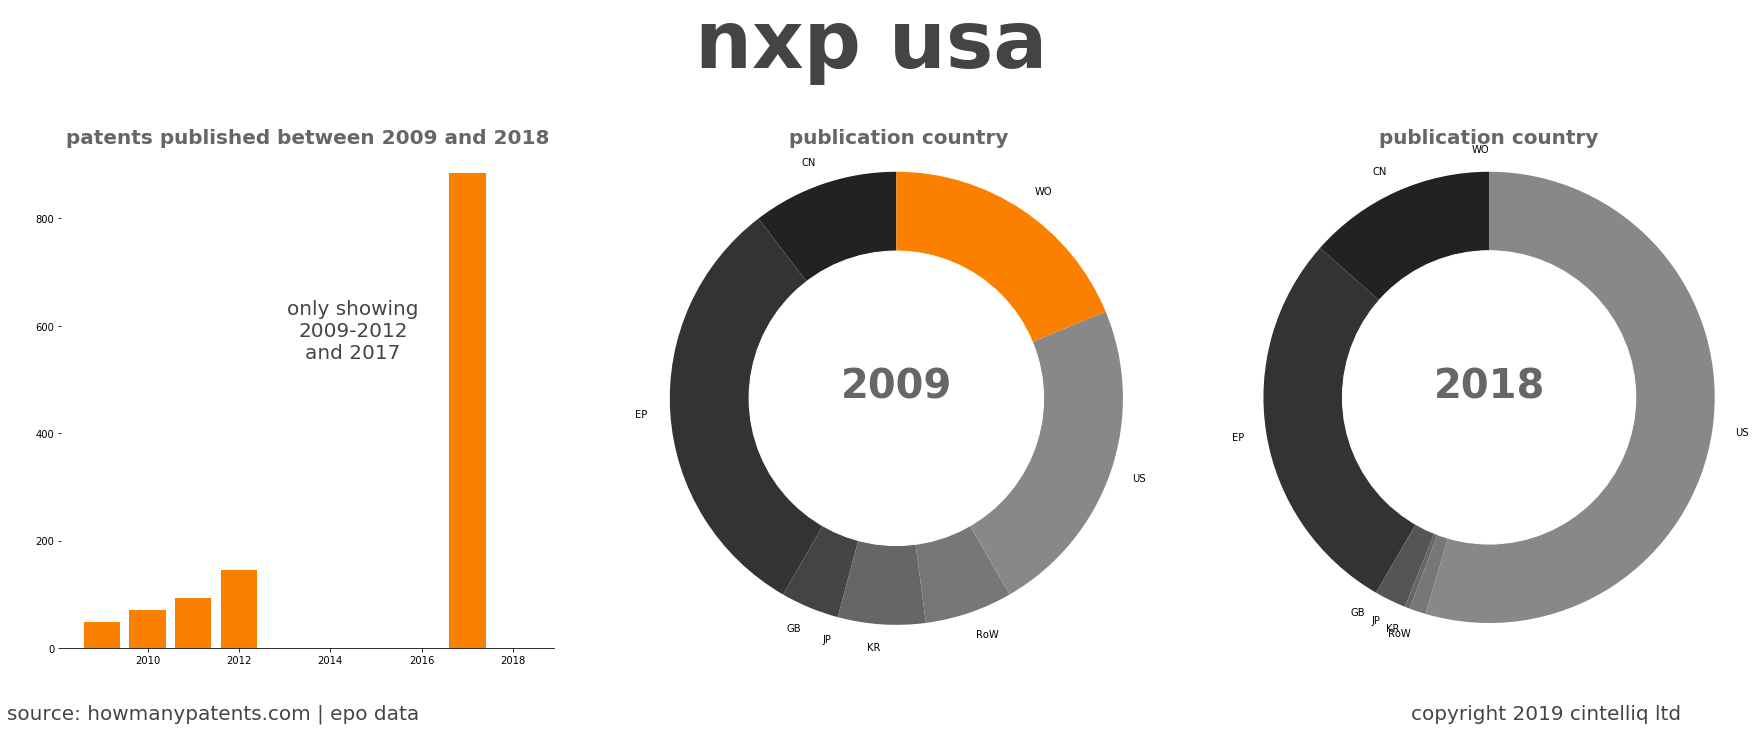 summary of patents for Nxp Usa